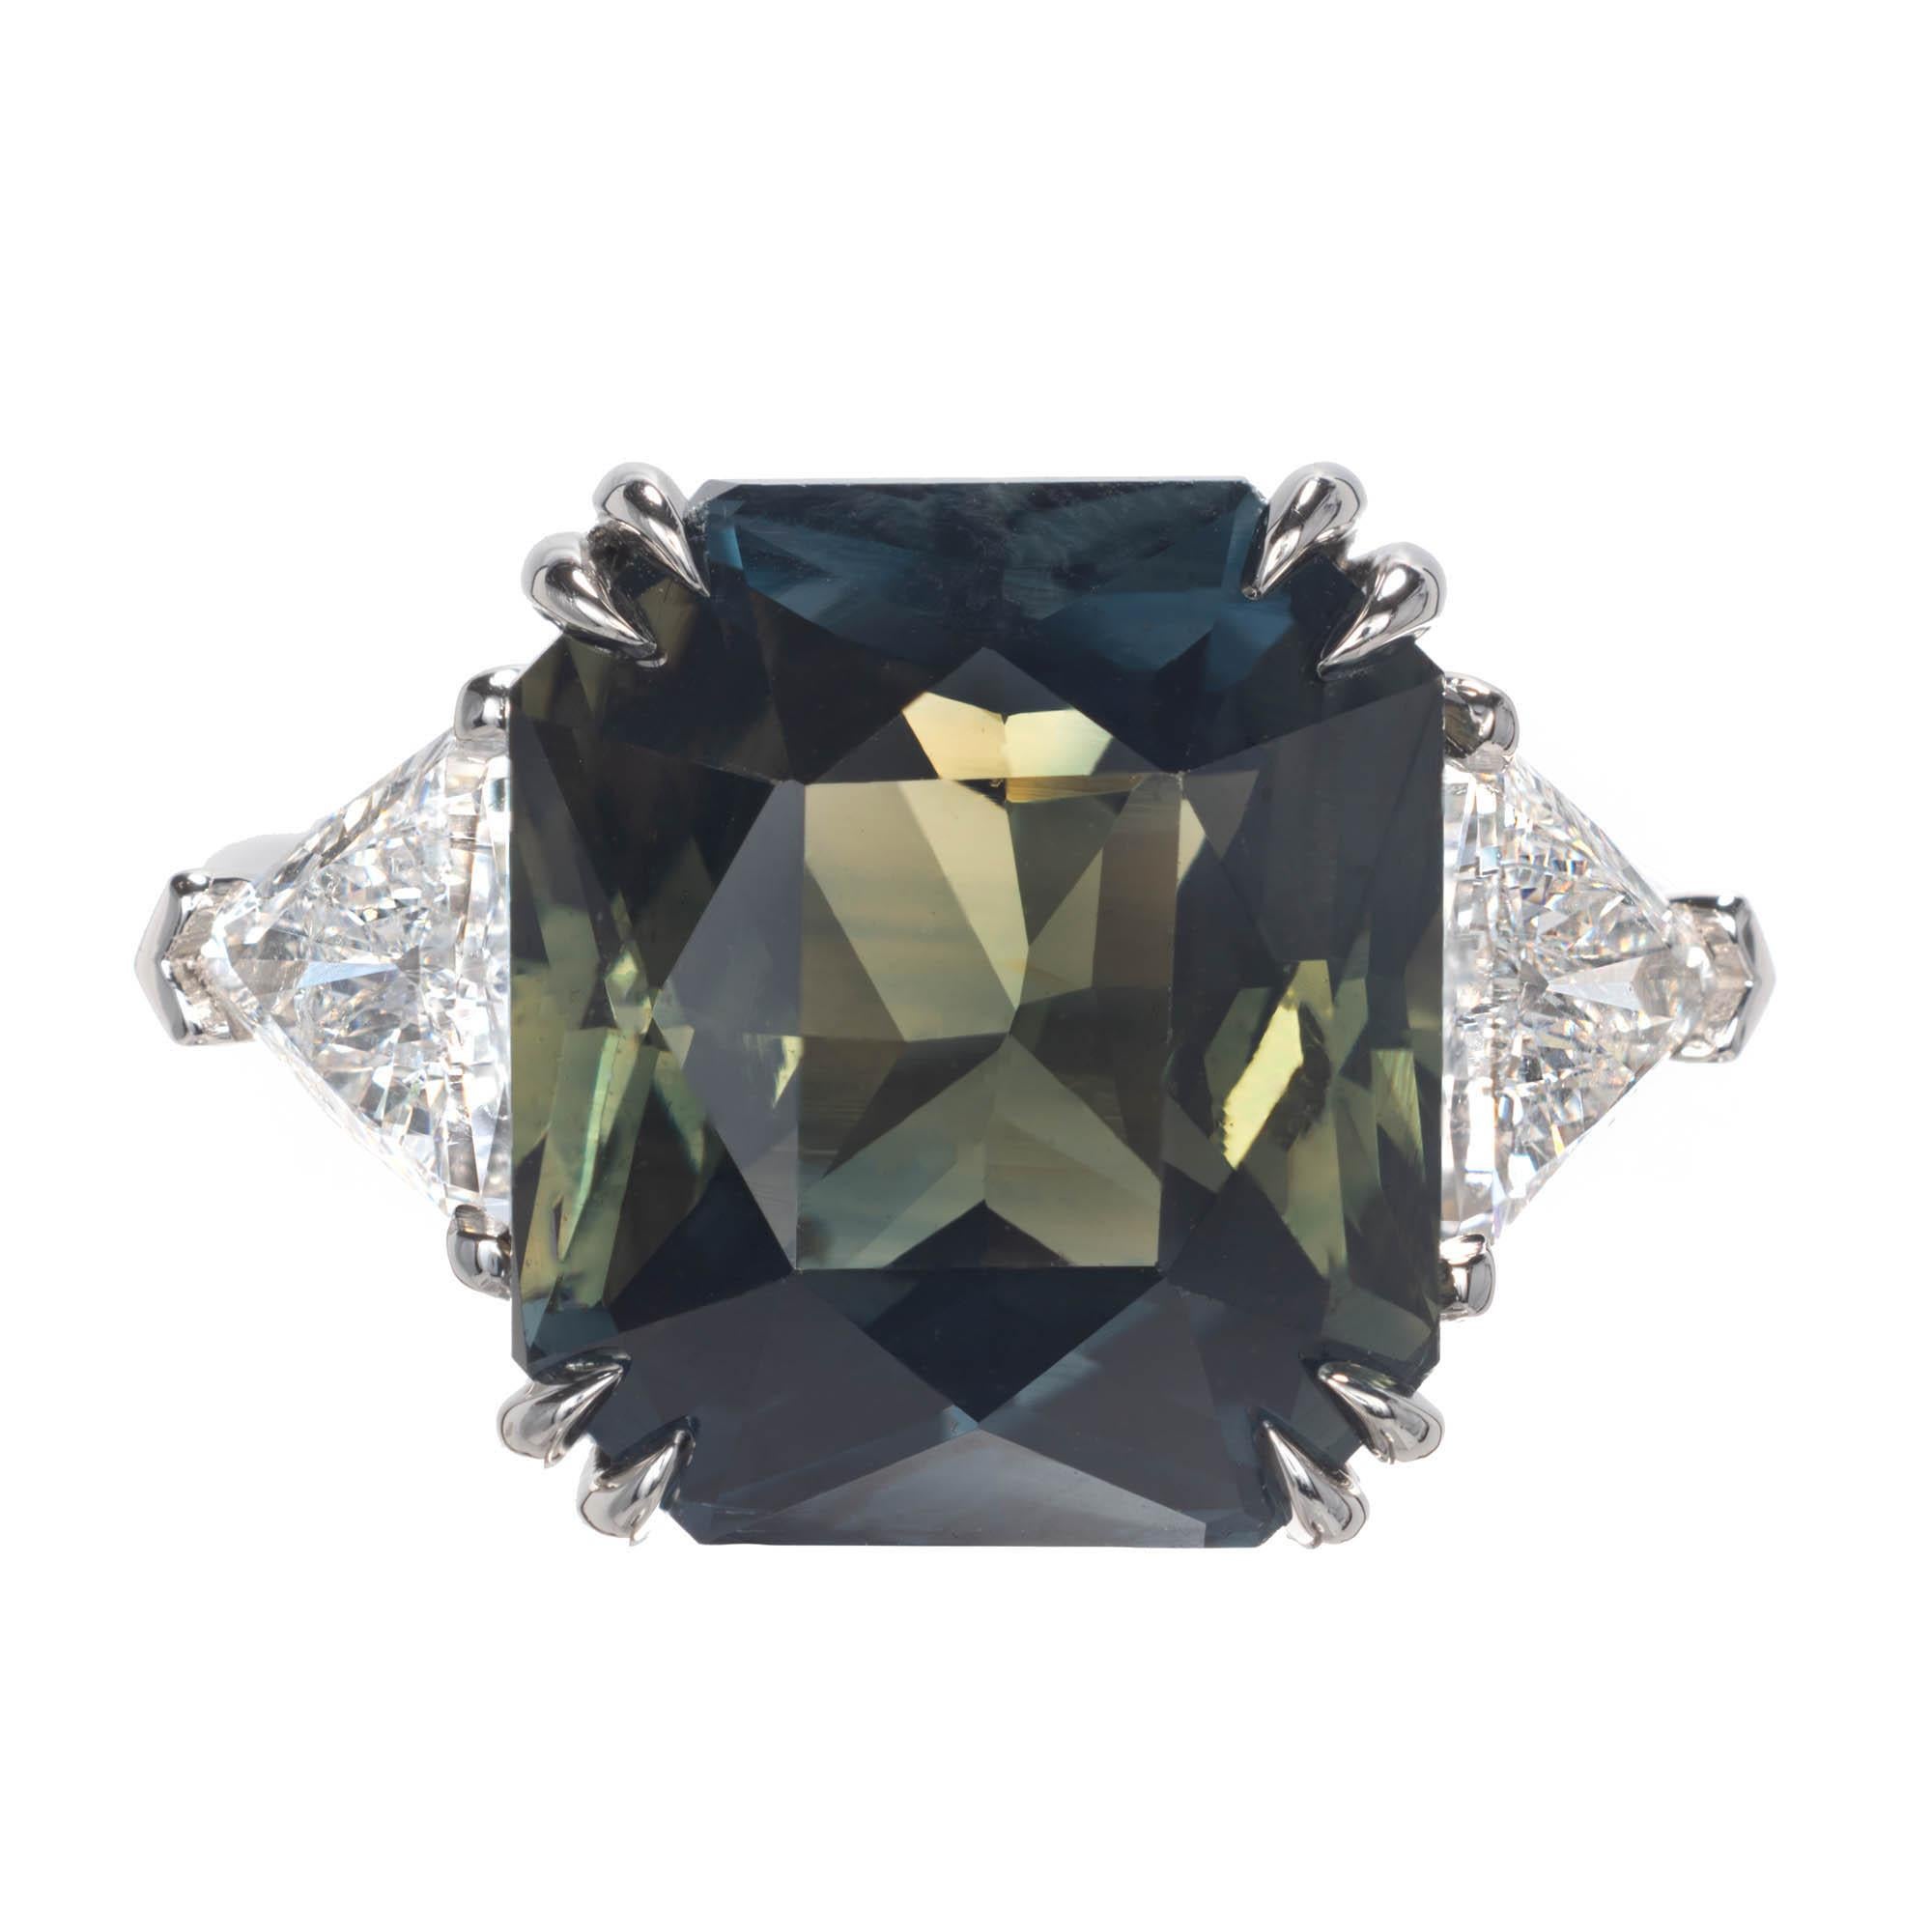 Ocatgonal cut sapphire and diamond three-stone ring. The center stone is a rich mix of both blue and green color, accented by two trilliant cut side diamonds in a three-stone platinum setting. GIA certified natural no heat. The ring was designed and